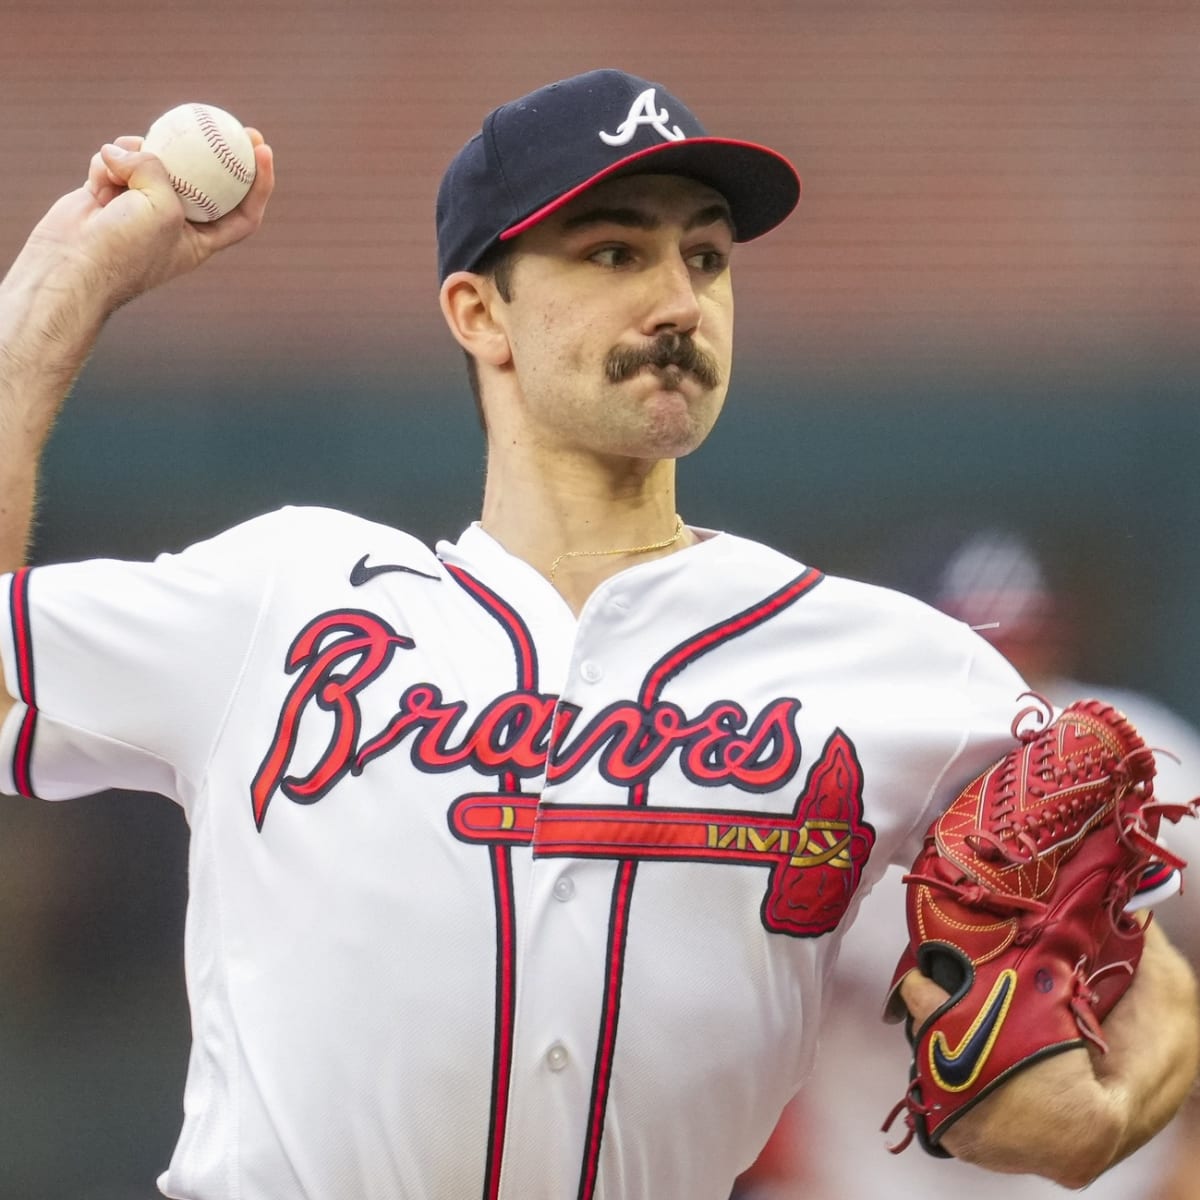 The Braves roster is taking shape, and it's exciting